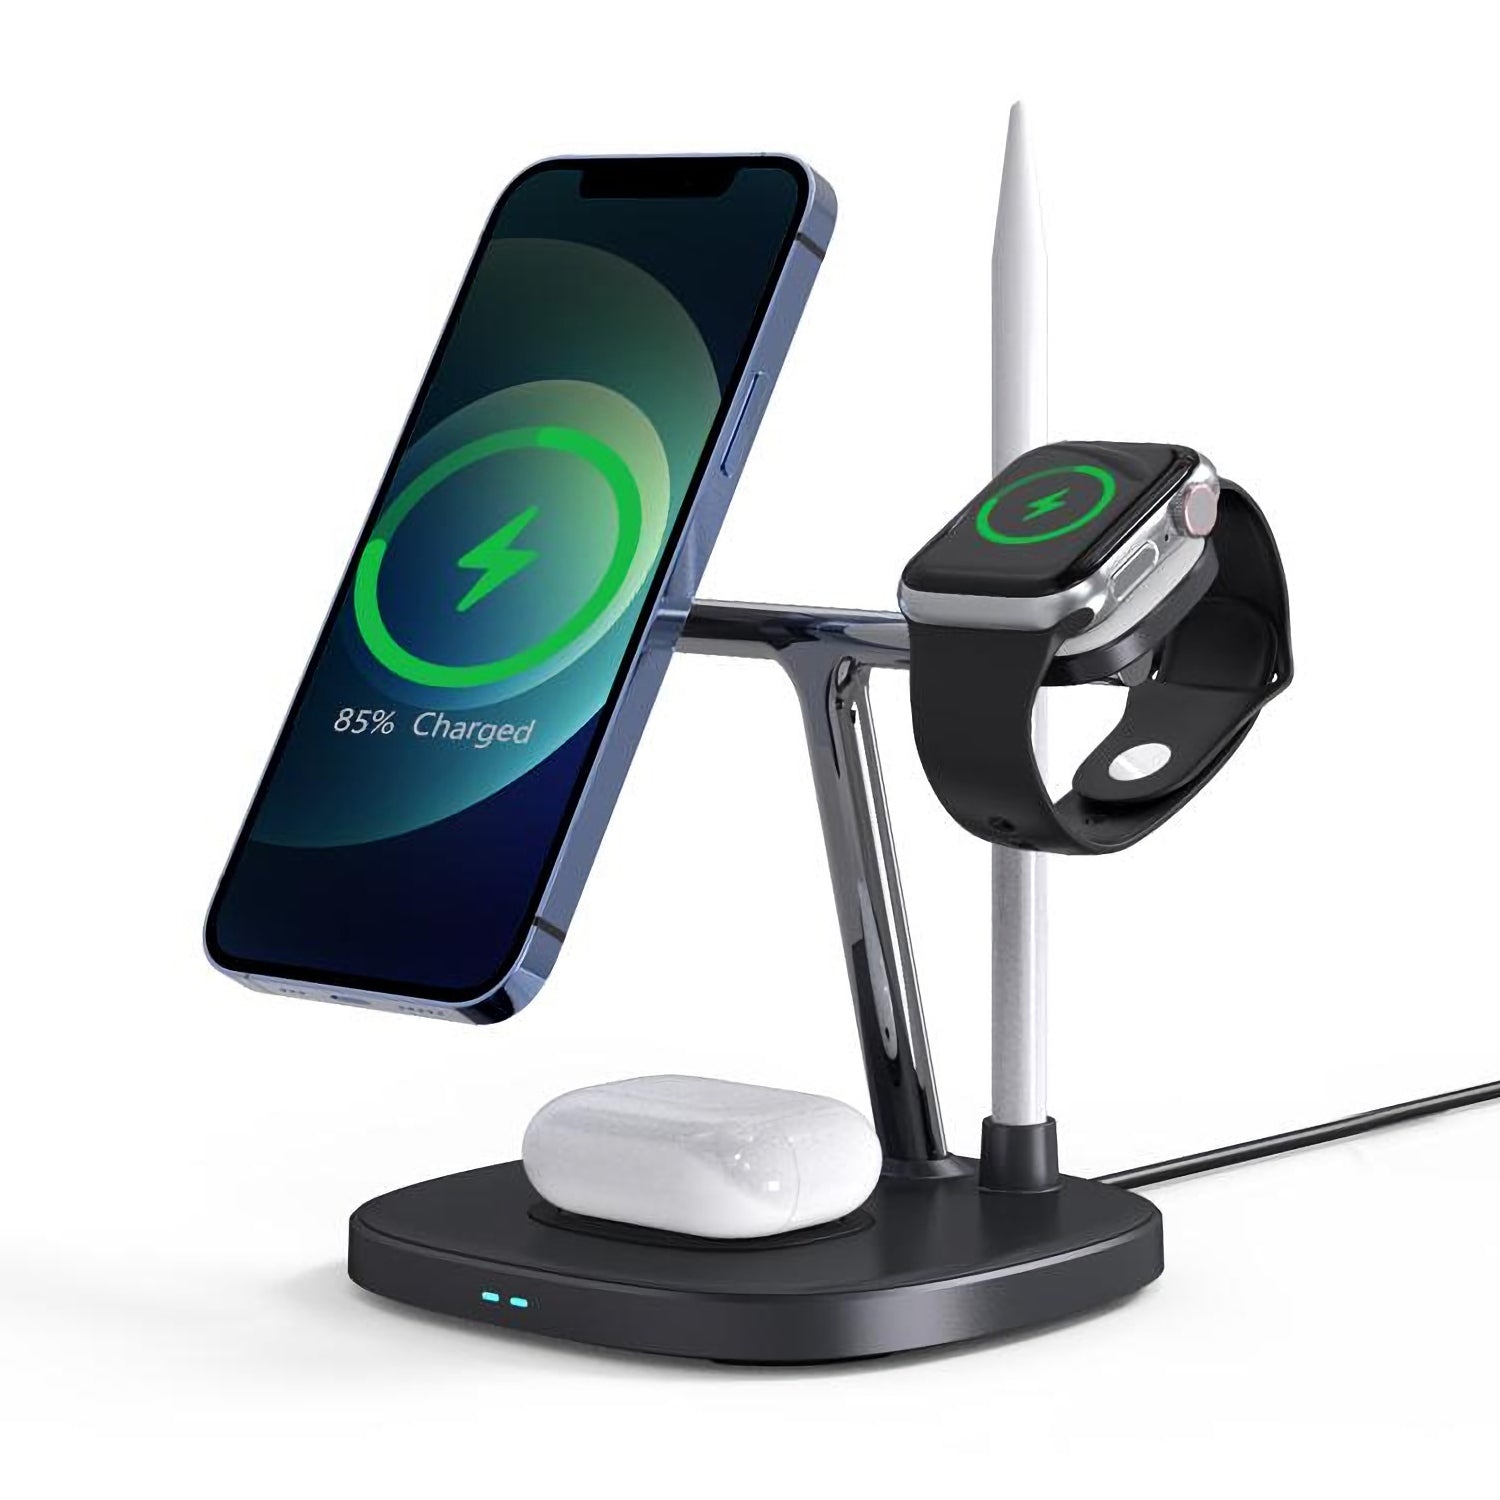 CHOETECH T583-F 4-in-1 Magentic Wireless Charging Station for iPhone/Apple Watch/Headphones/Pencil-Chargers-PEROZ Accessories